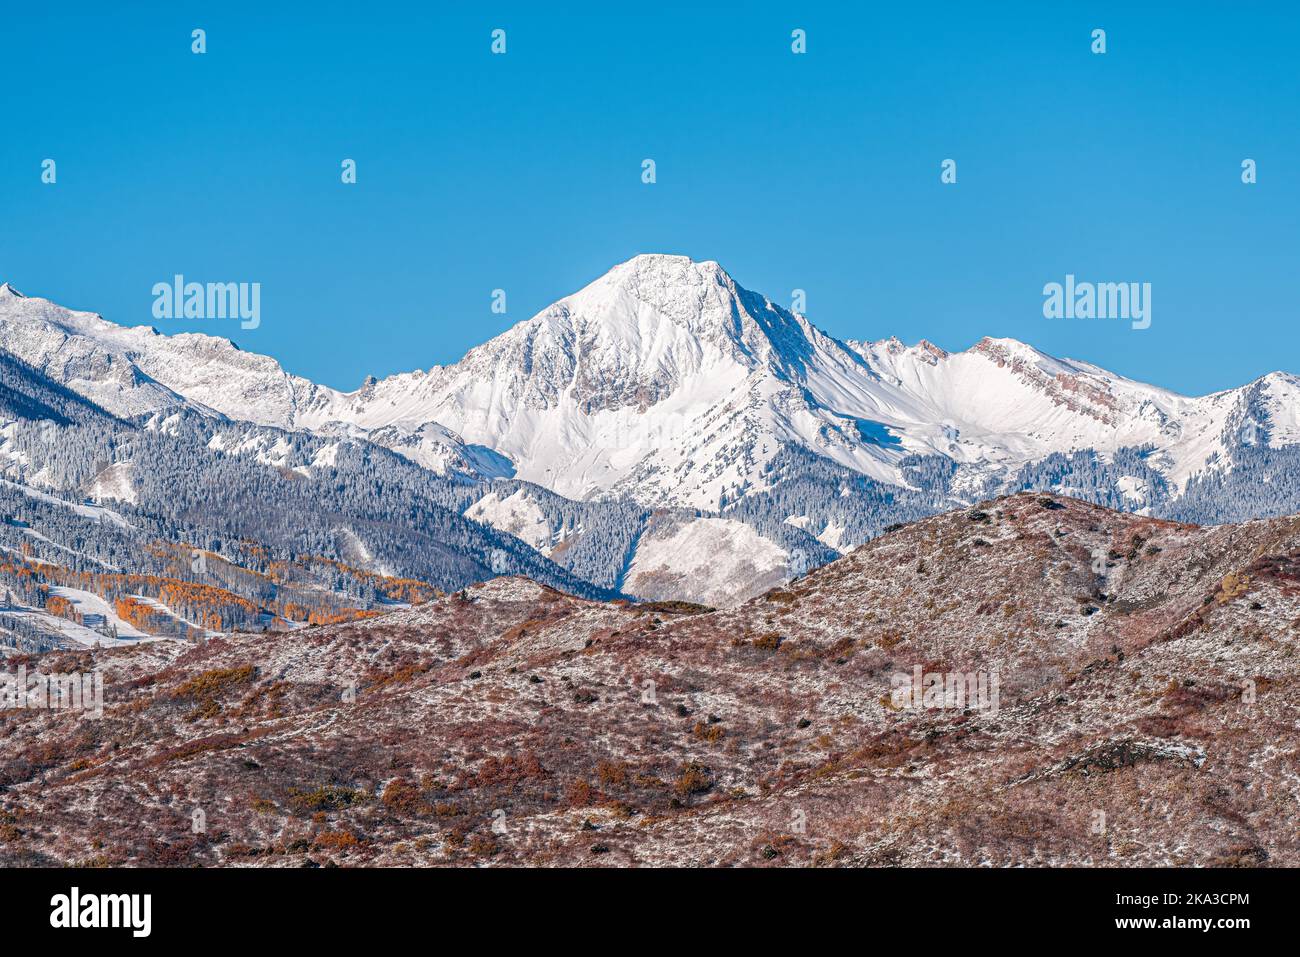 Aspen, Colorado with blue clear sky by Capitol Mt Daly Snowmass mountain peak ridge closeup in autumn fall season covered in winter snow Stock Photo